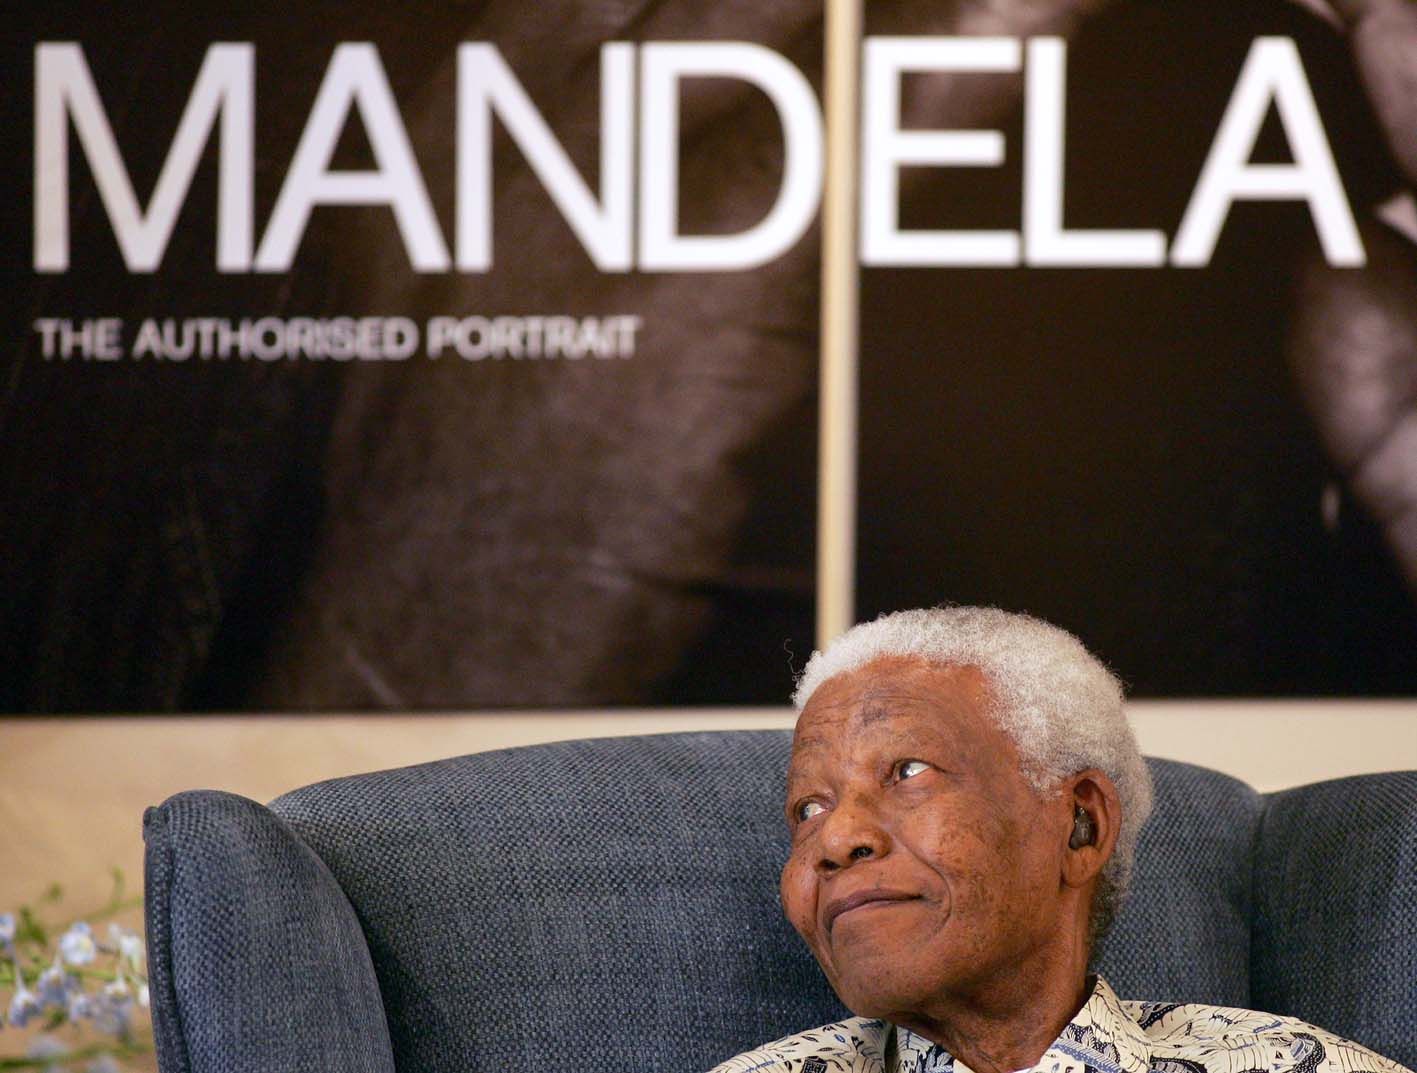 South Africa's former President Nelson Mandela attends the launch of his new book Mandela: The Authorised Portrait on October 9 2006 in Johannesburg. 